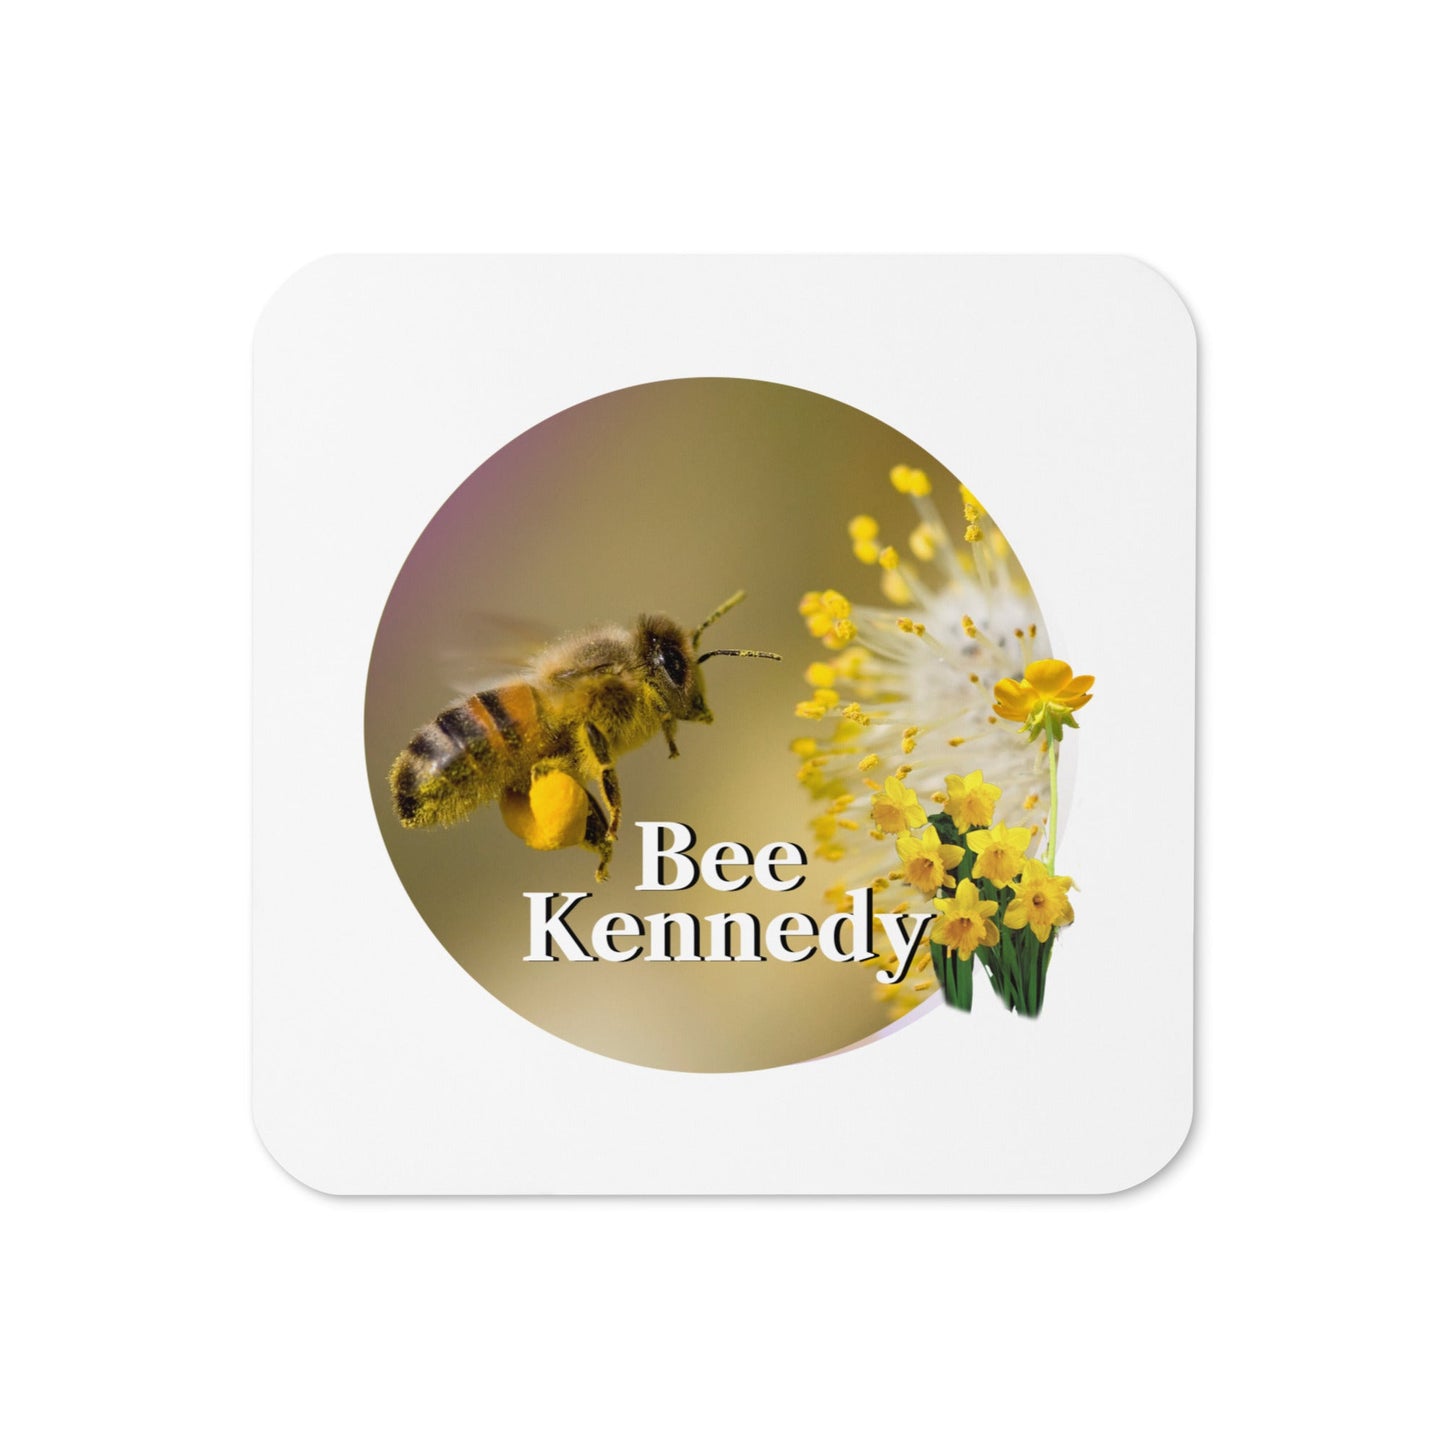 Bee Kennedy Cork - Back Drink Coaster - TEAM KENNEDY. All rights reserved